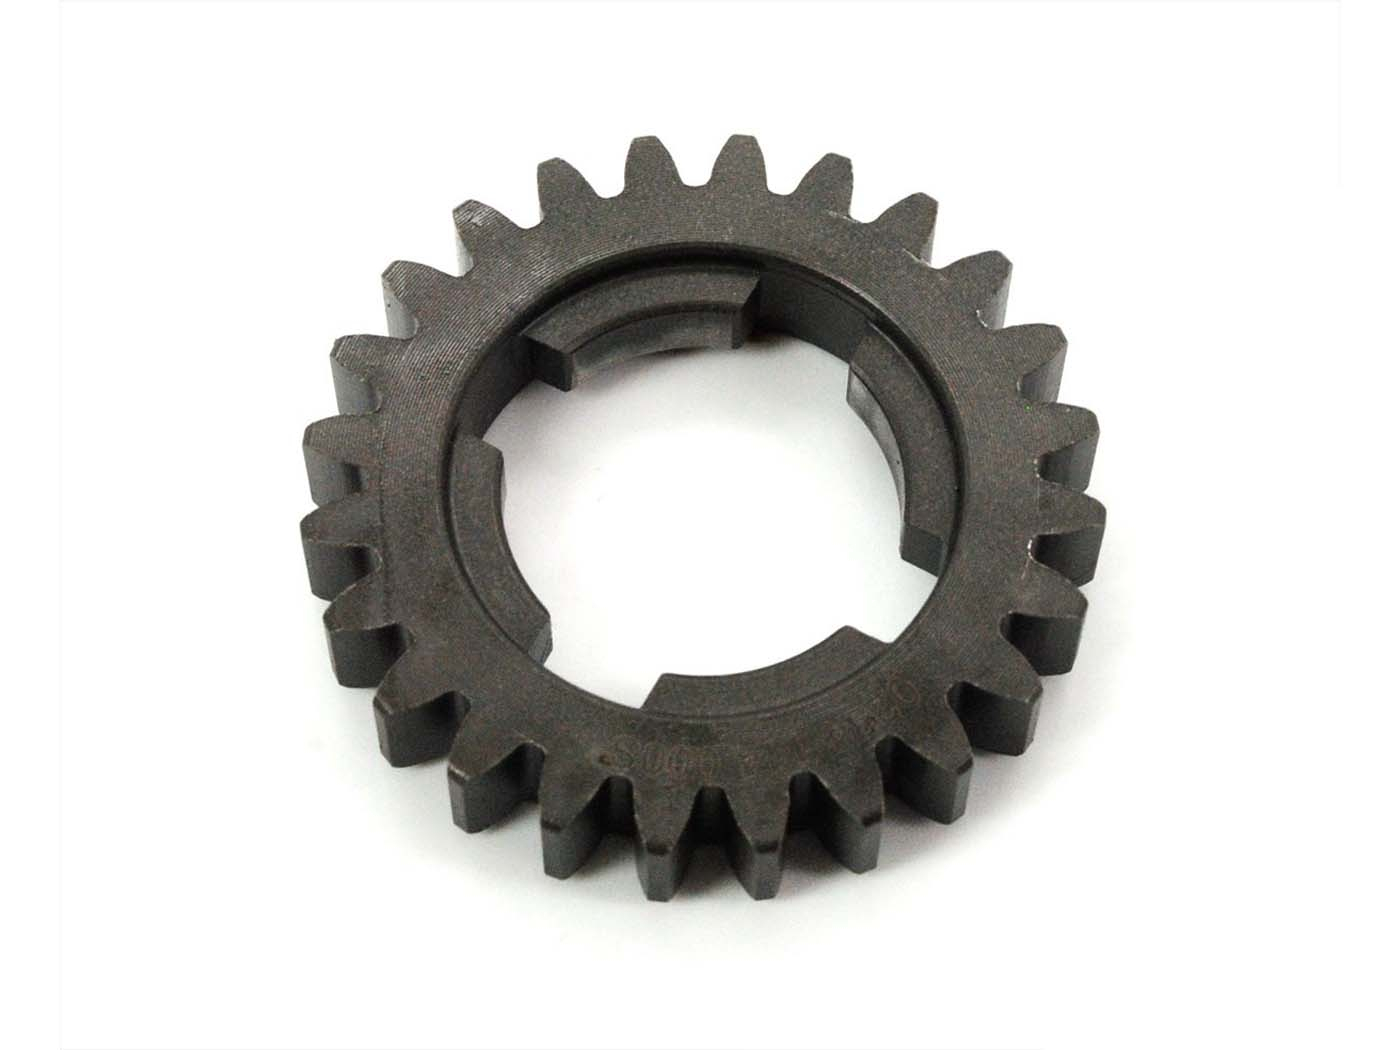 Engine 4-speed Gearbox Small Gear Wheel 24 For Hercules Miele DKW Sachs 50/4